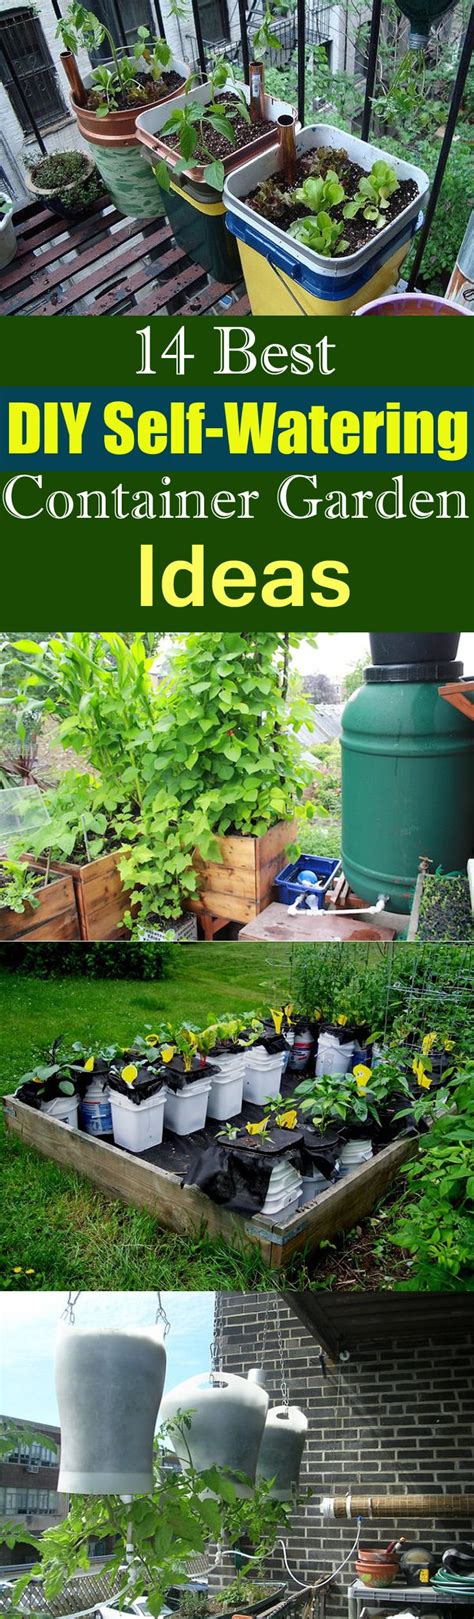 We did not find results for: 14 Best DIY Self-Watering Container Garden Ideas | Balcony Garden Web